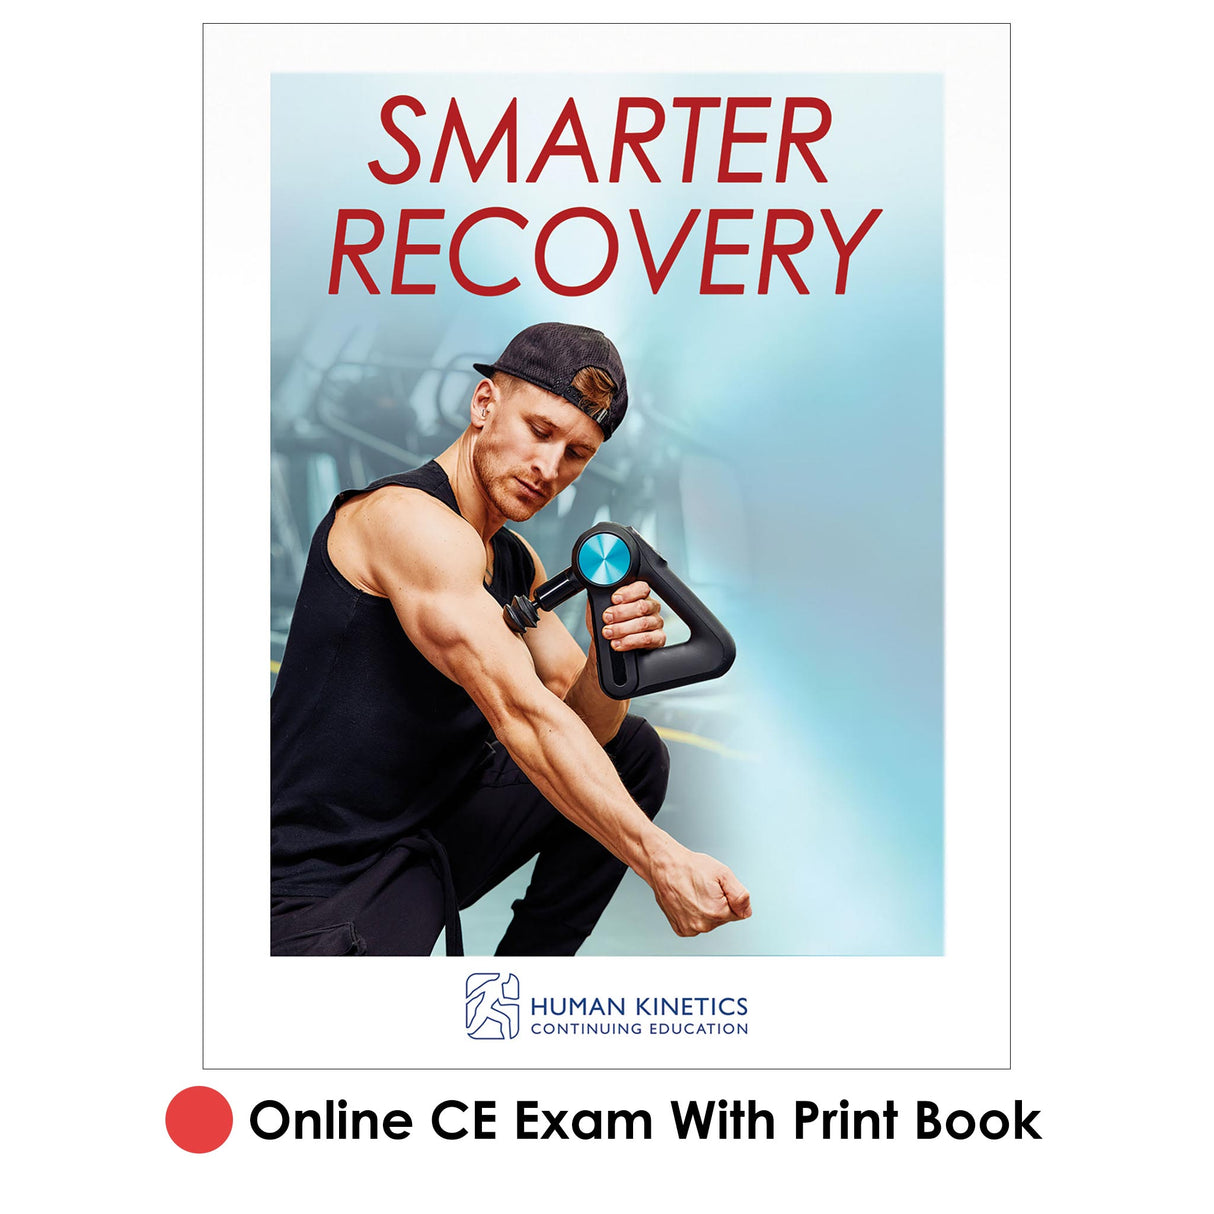 Smarter Recovery Online CE Exam With Print Book